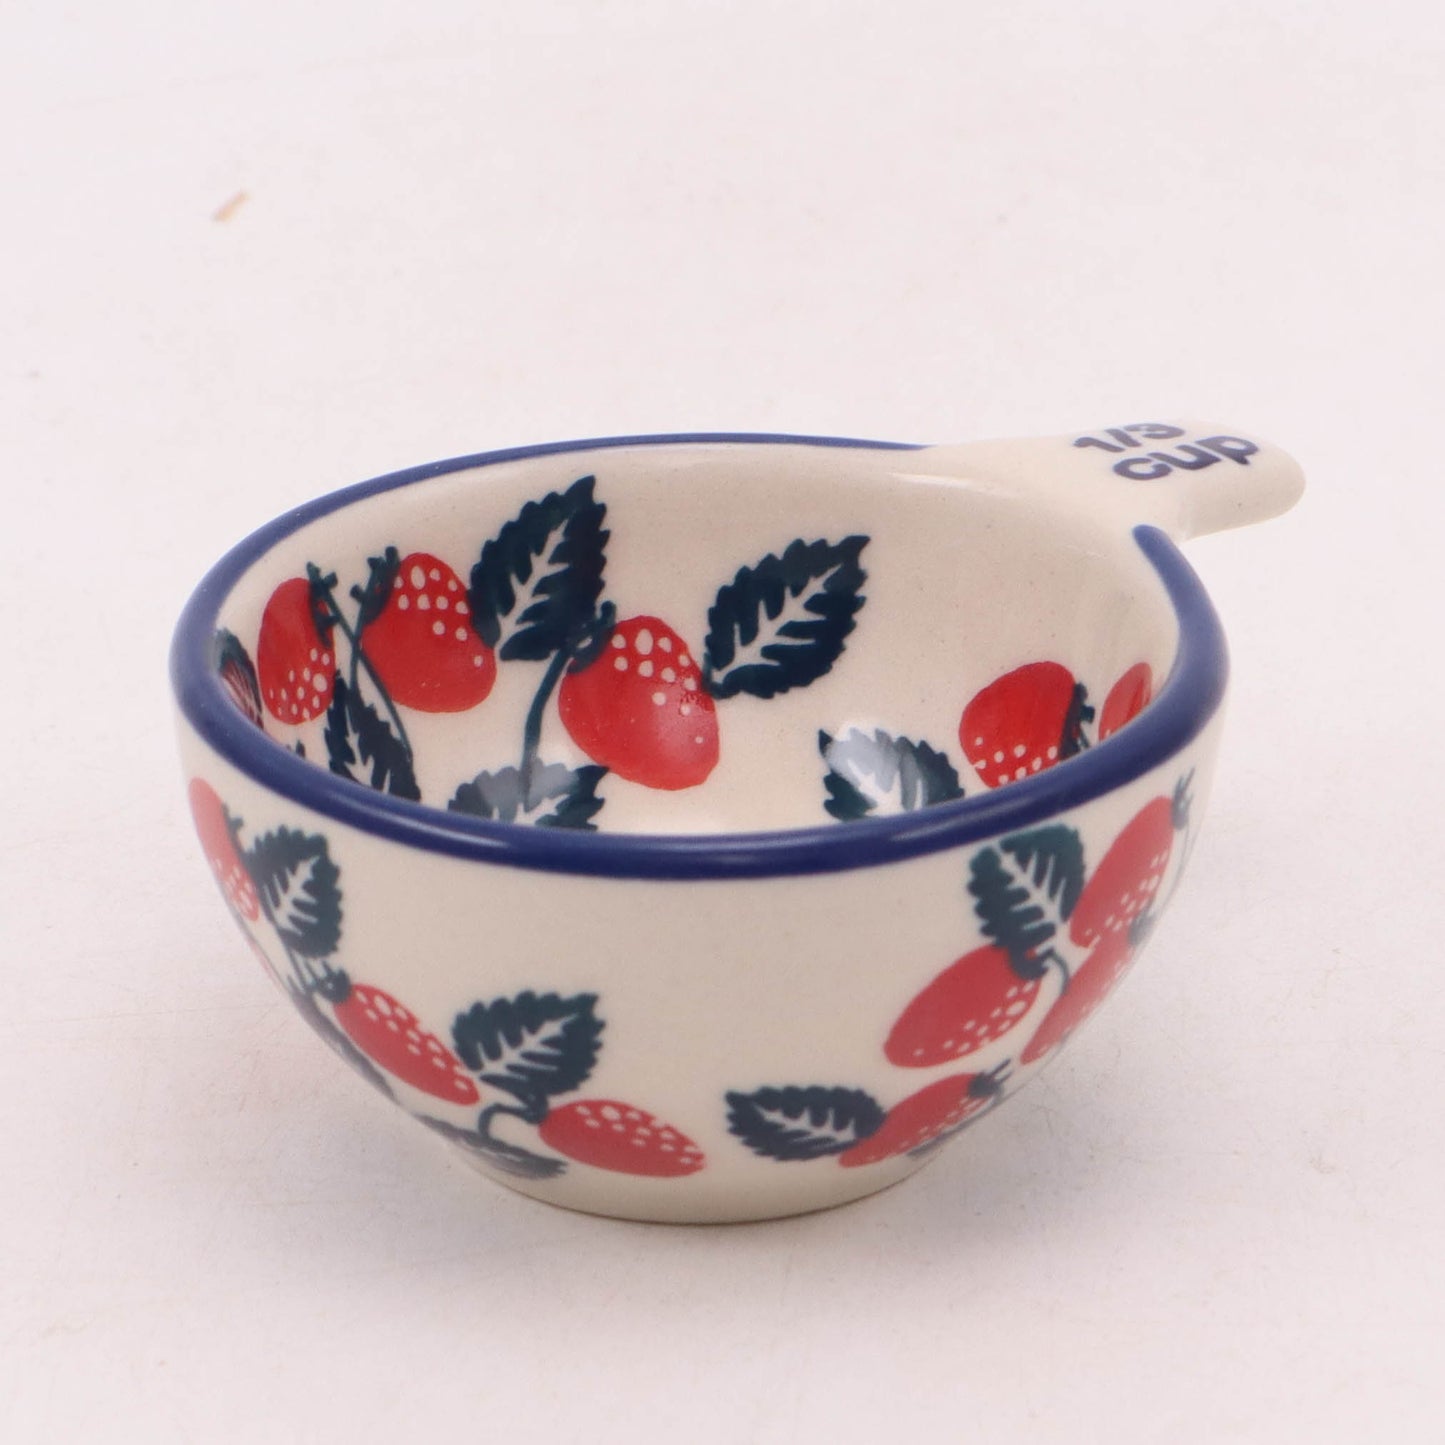 1/3 Cup Measuring Cup. Pattern: Strawberry Jam